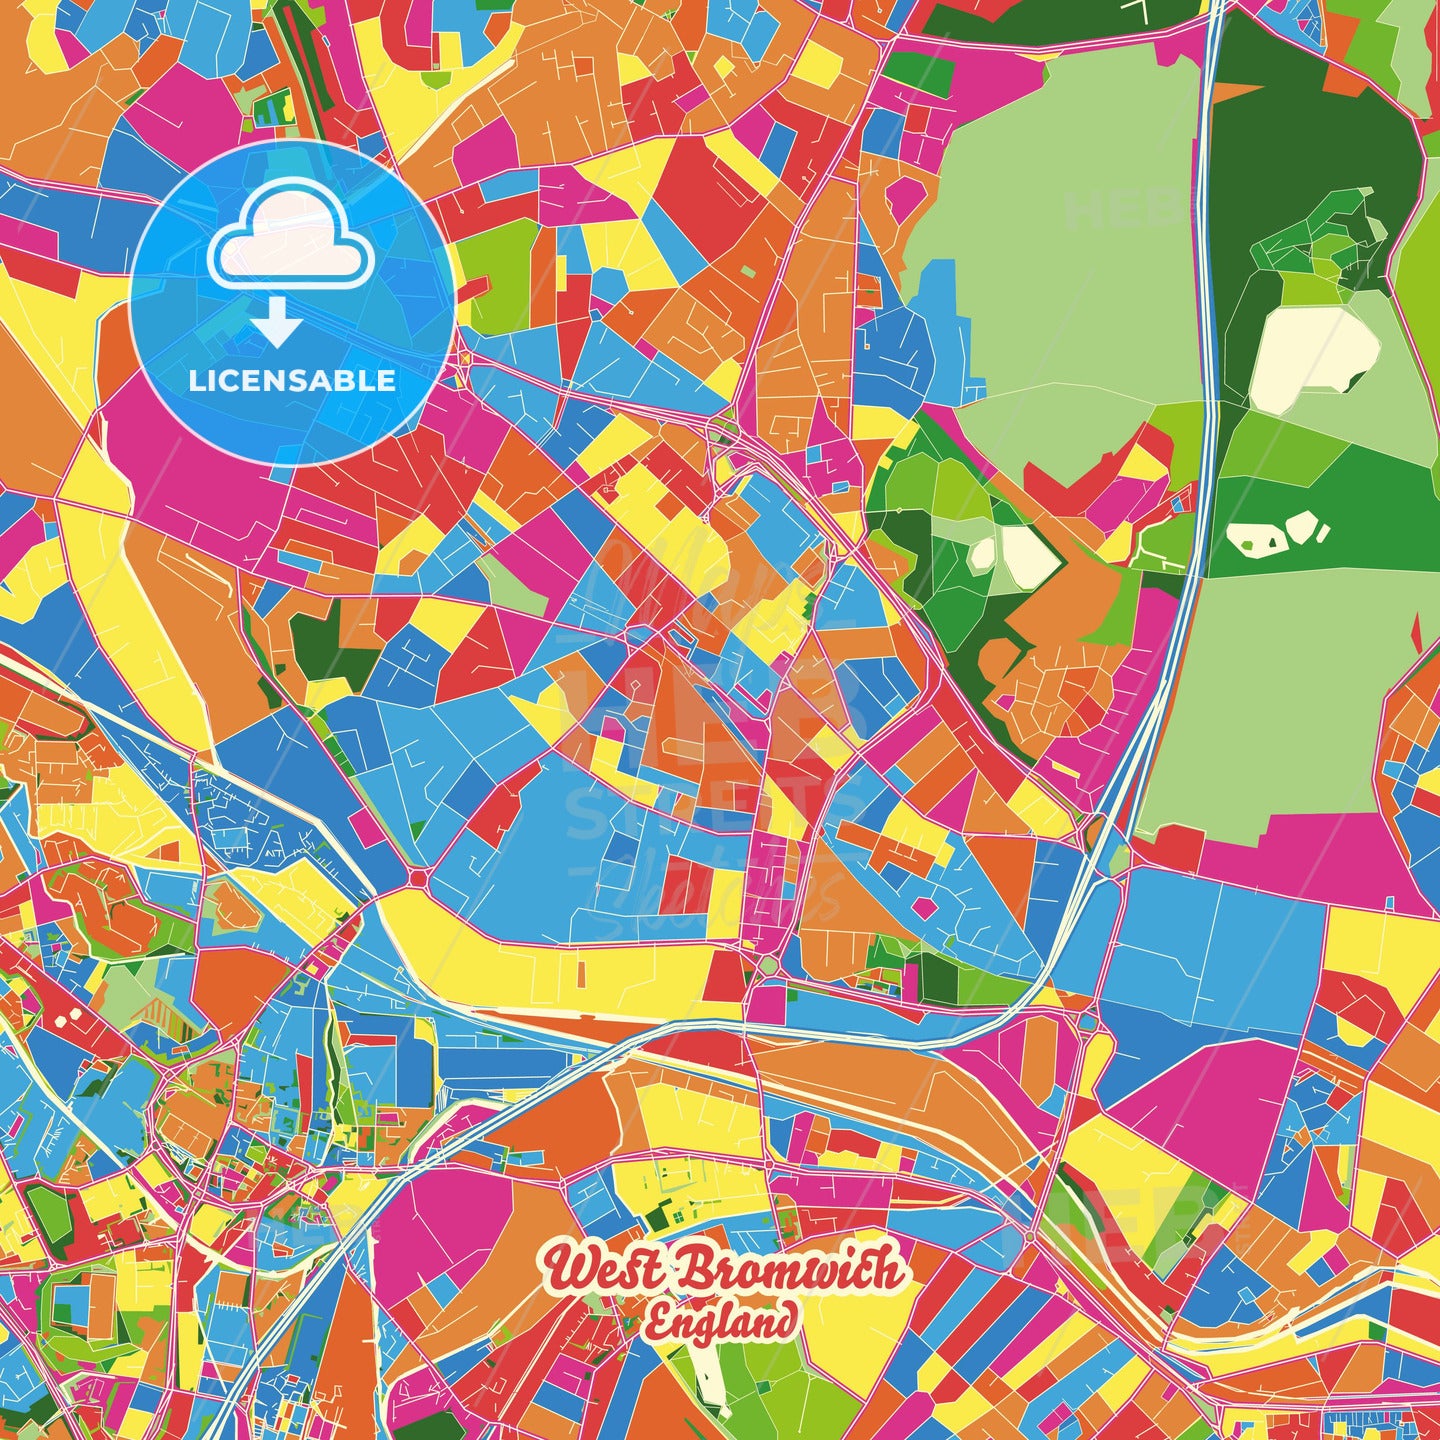 West Bromwich, England Crazy Colorful Street Map Poster Template - HEBSTREITS Sketches